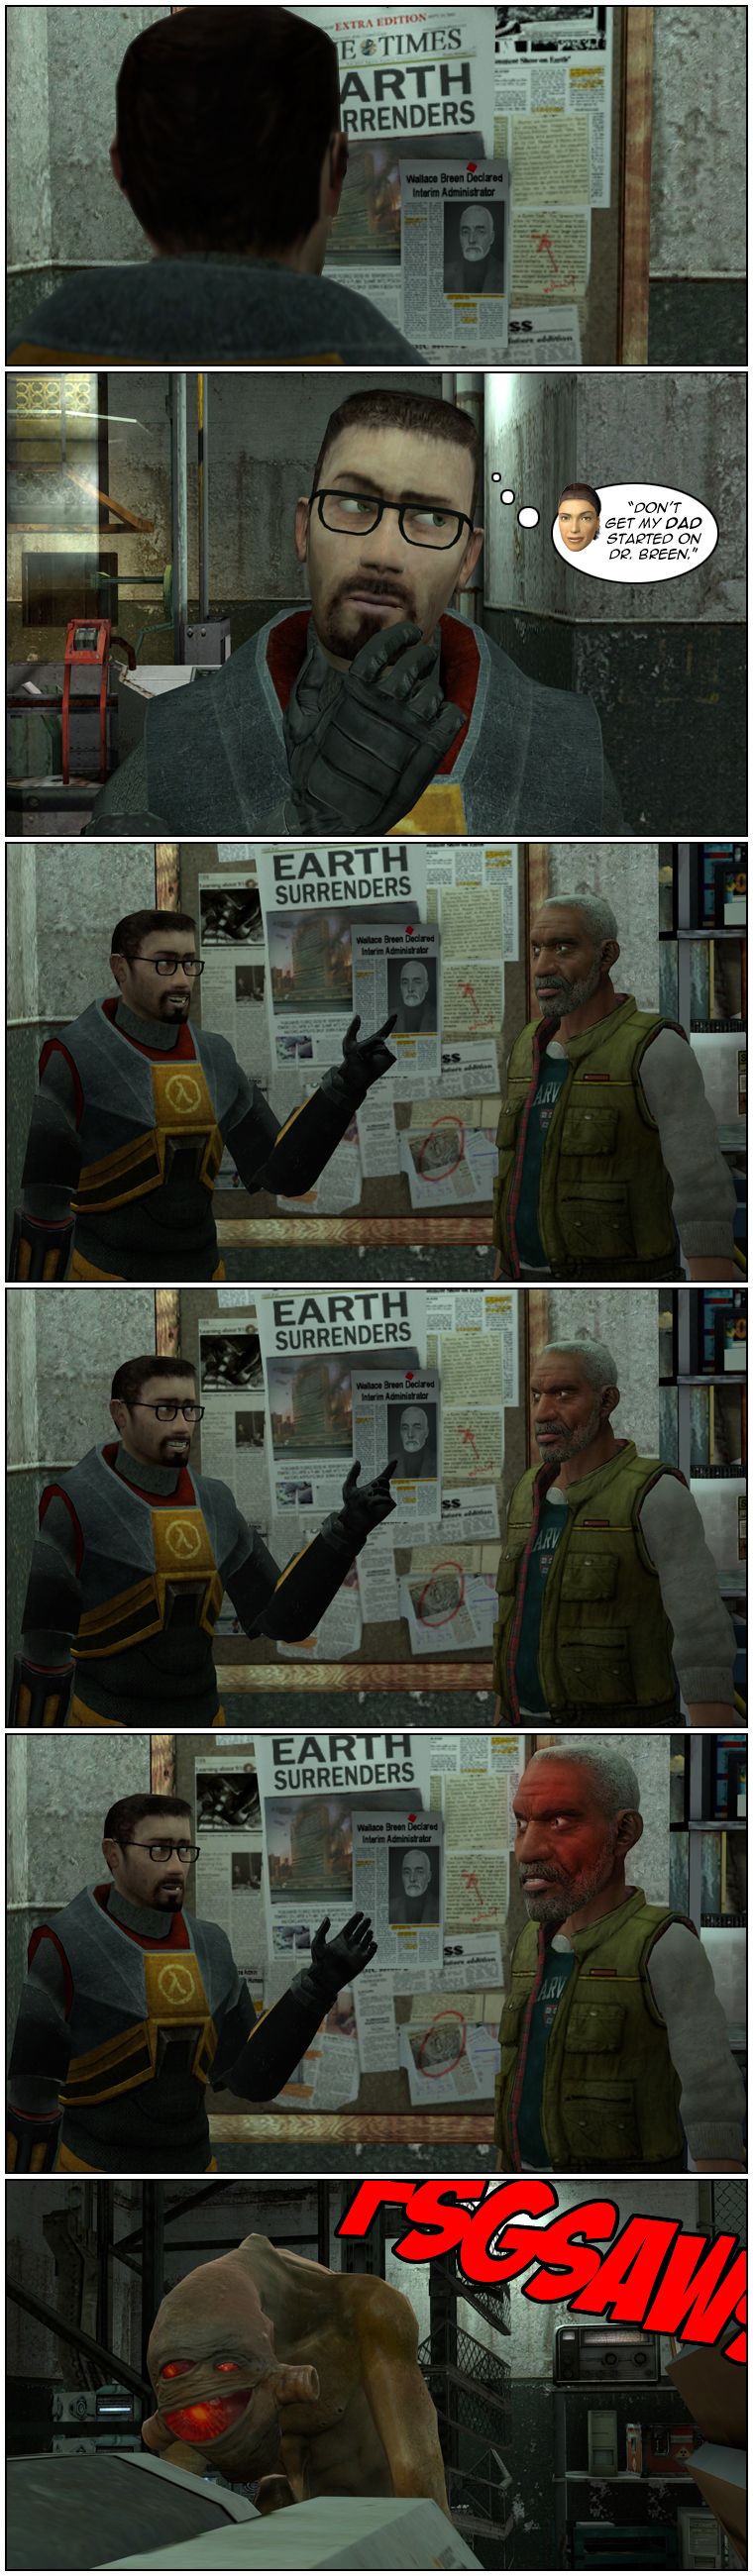 At Black Mesa East, Gordon Freeman is staring at a corkboard with newspaper clippings about the Seven Hour War, one of which features a photo of Wallace Breen. Gordon recalls Alyx Vance telling him not to get her dad started on Doctor Breen. Eli Vance approaches and Gordon smiles and points at Breen's photo. Eli Vance's expression turns dour as Gordon smiles awkwardly. Suddenly, Eli's face turns red and his head enlarges as his expression grows angrier, with Gordon looking scared. Cut to a vortigaunt working nearby and ignoring the screams of anger from Eli. The end.